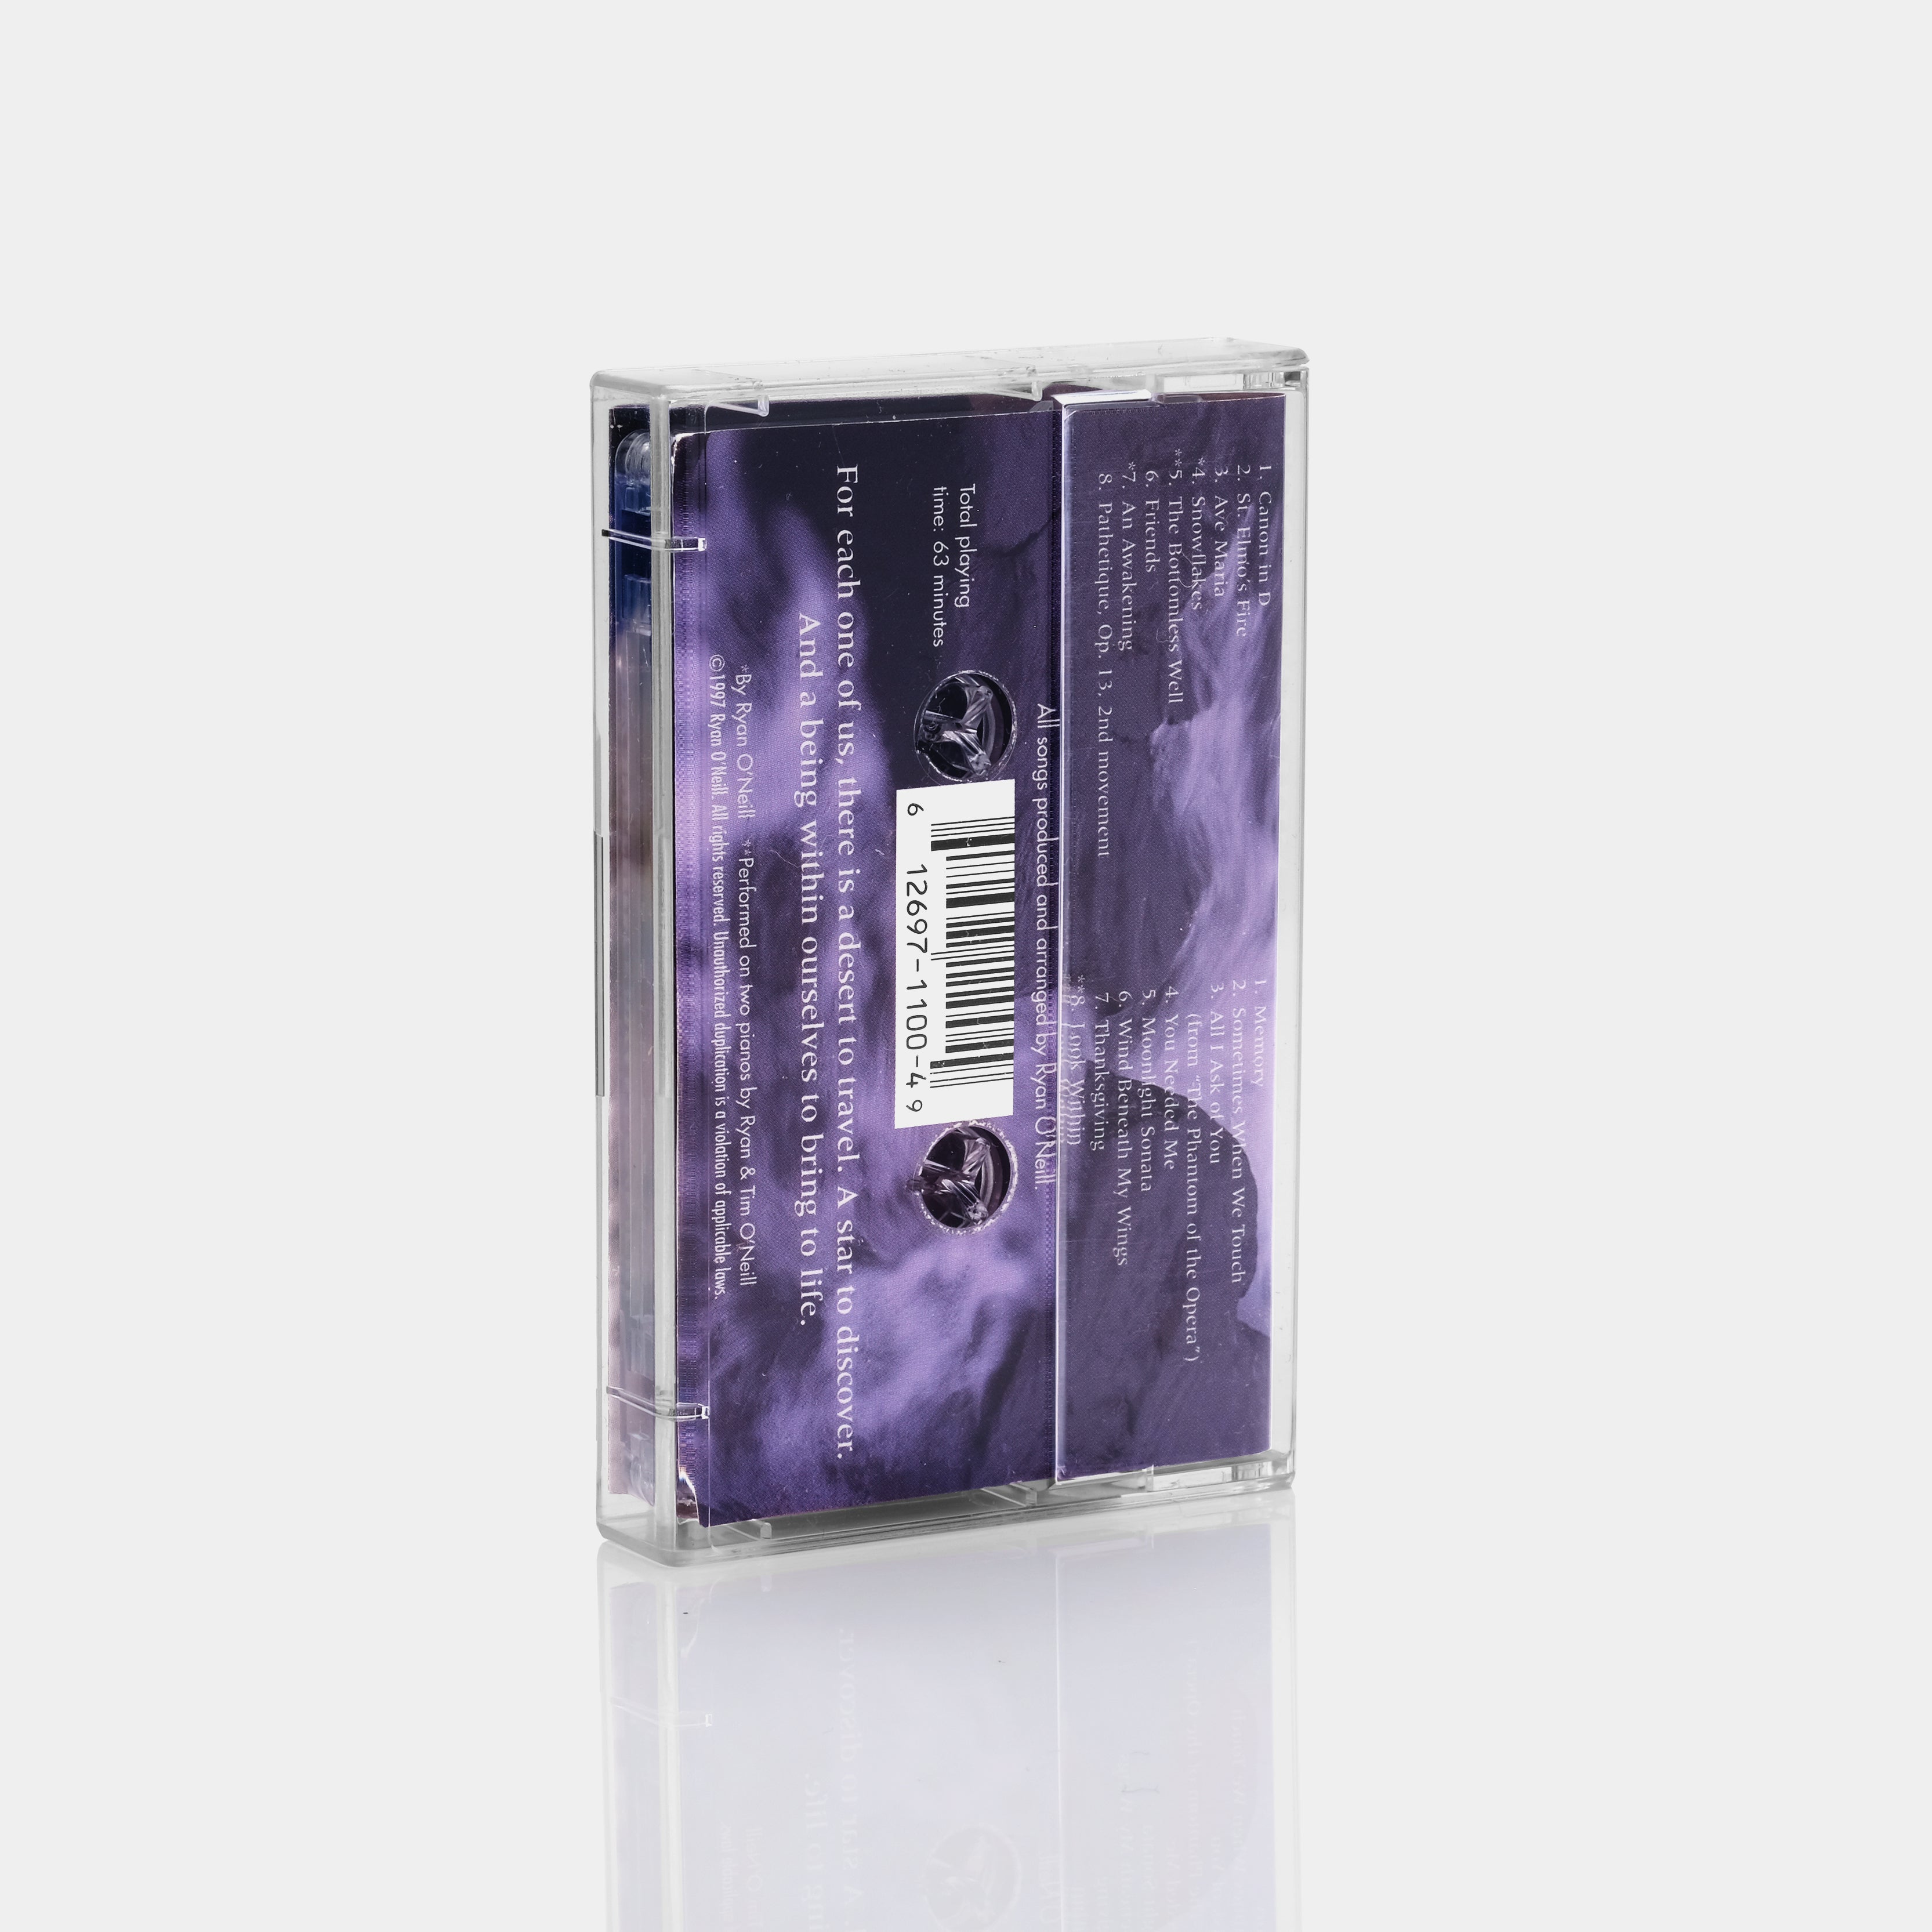 Ryan O'Neill - Look Within Cassette Tape